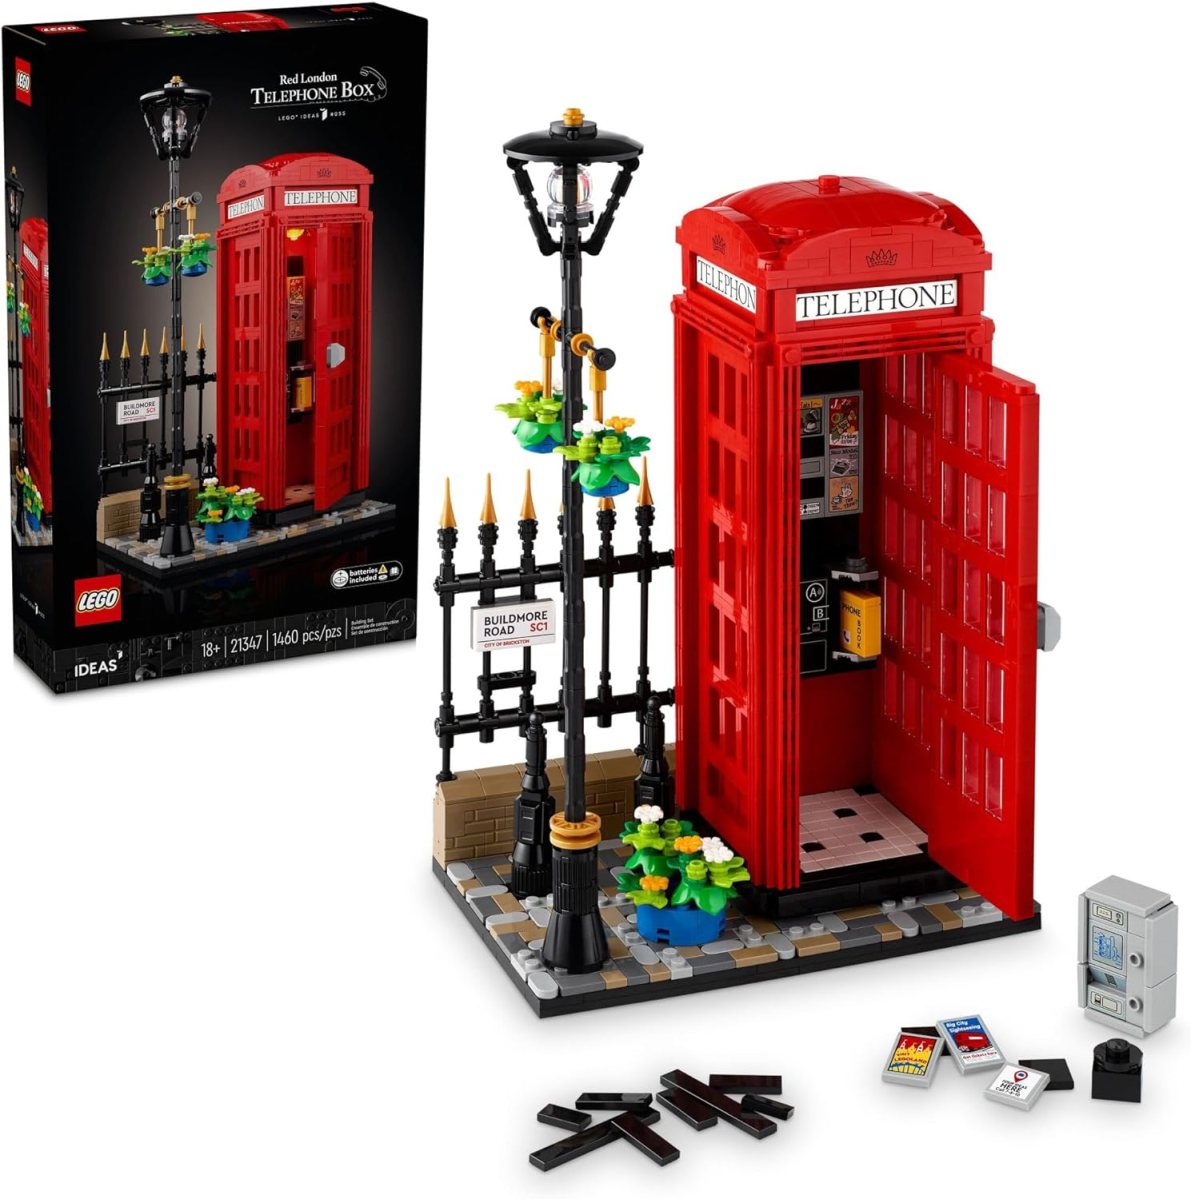 A model of an iconic red London Telephone box made out of LEGO